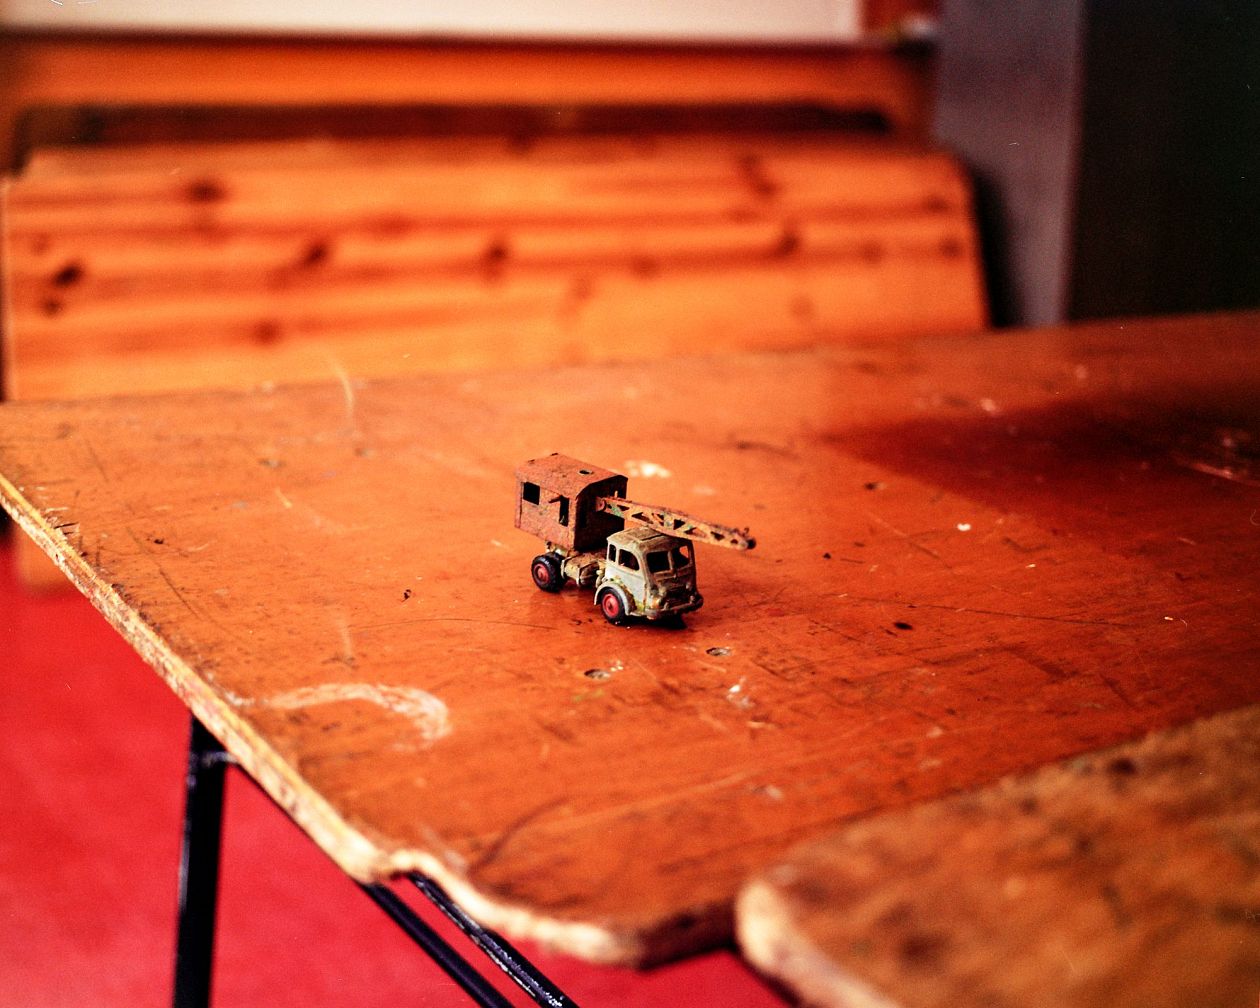 Model of a toy car on an old wooden table in a room